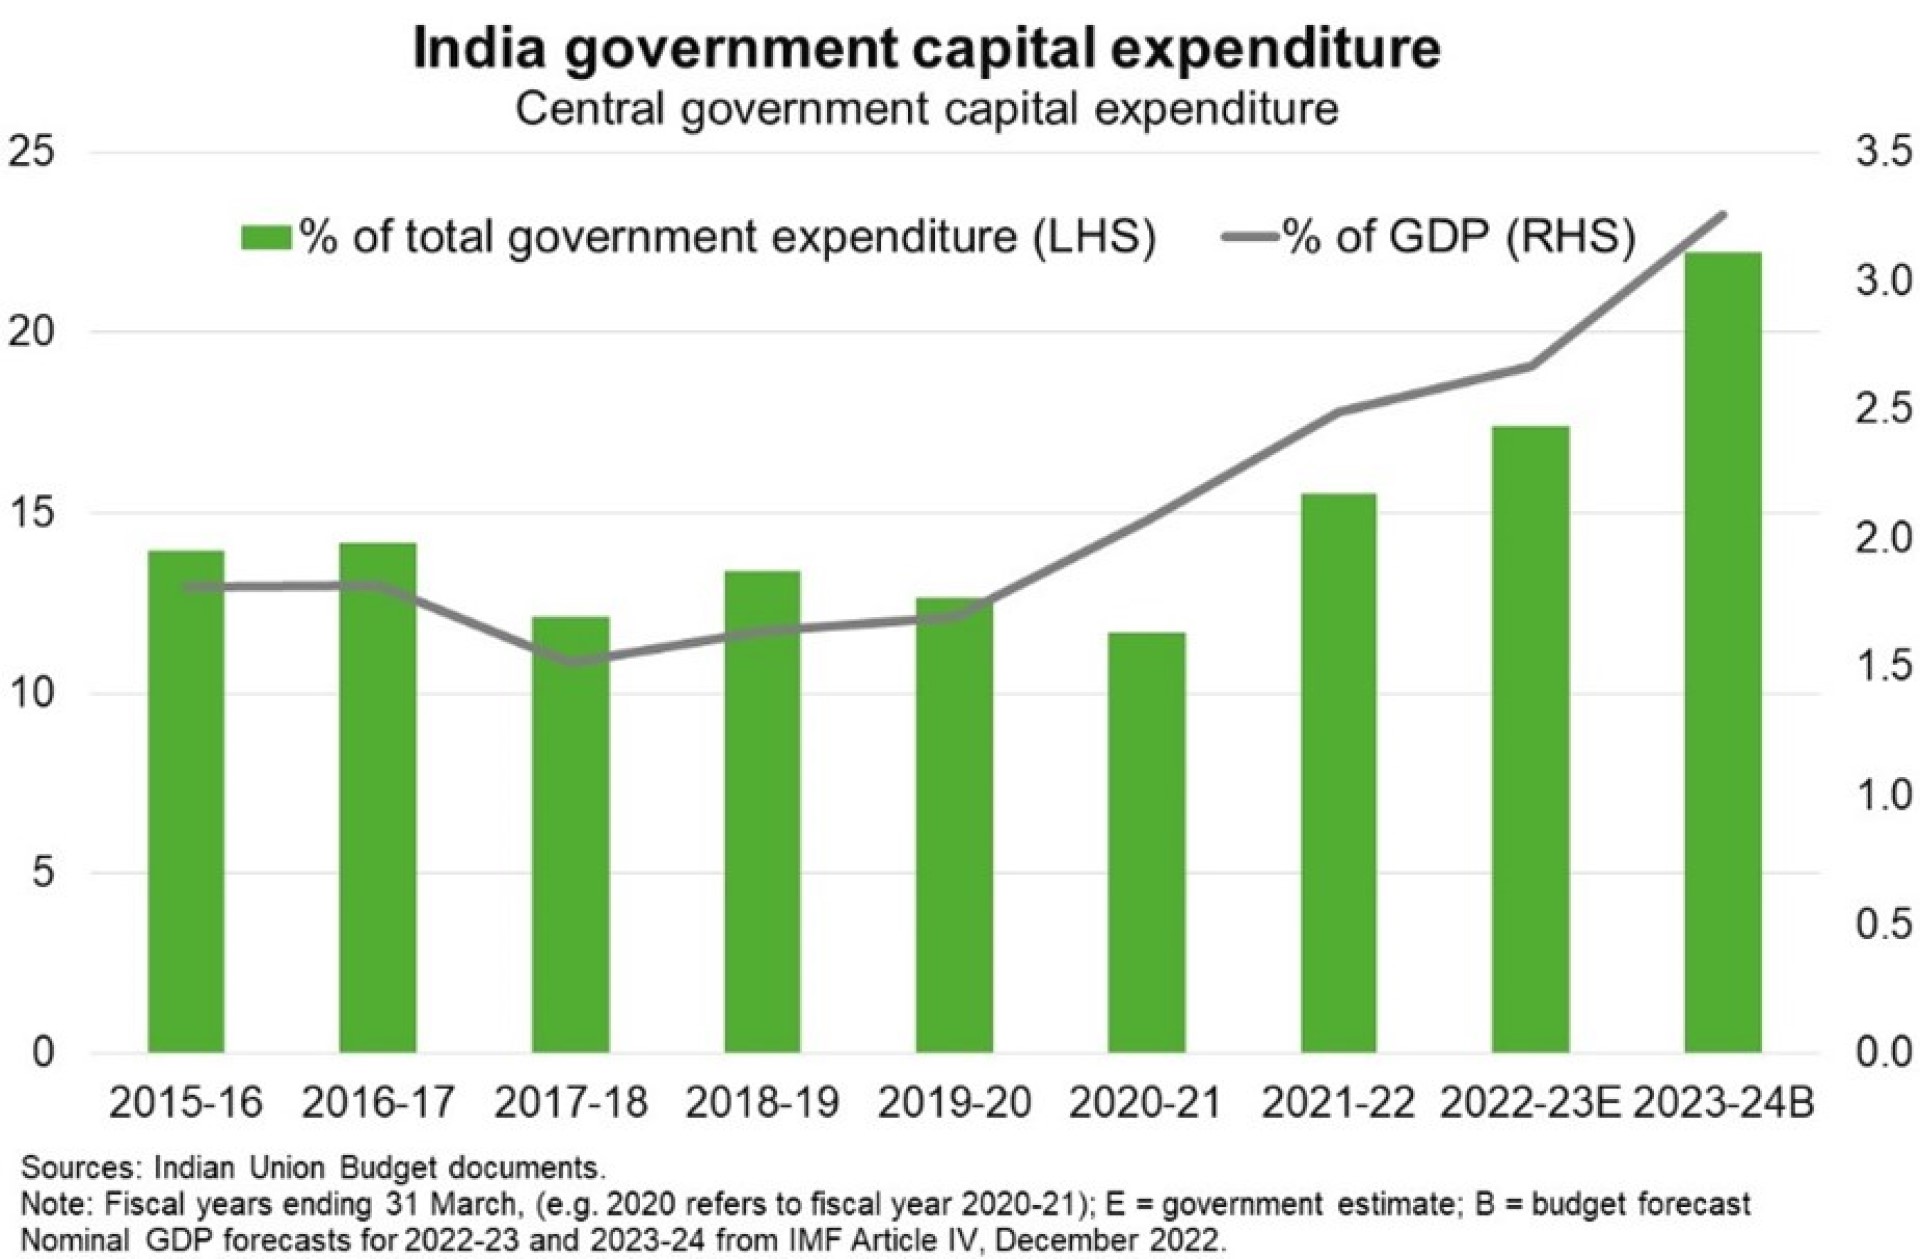 India’s capital spending will account for 22% of total government spending (3% of GDP) in 2023-24, up from 12% in fiscal 2020. 